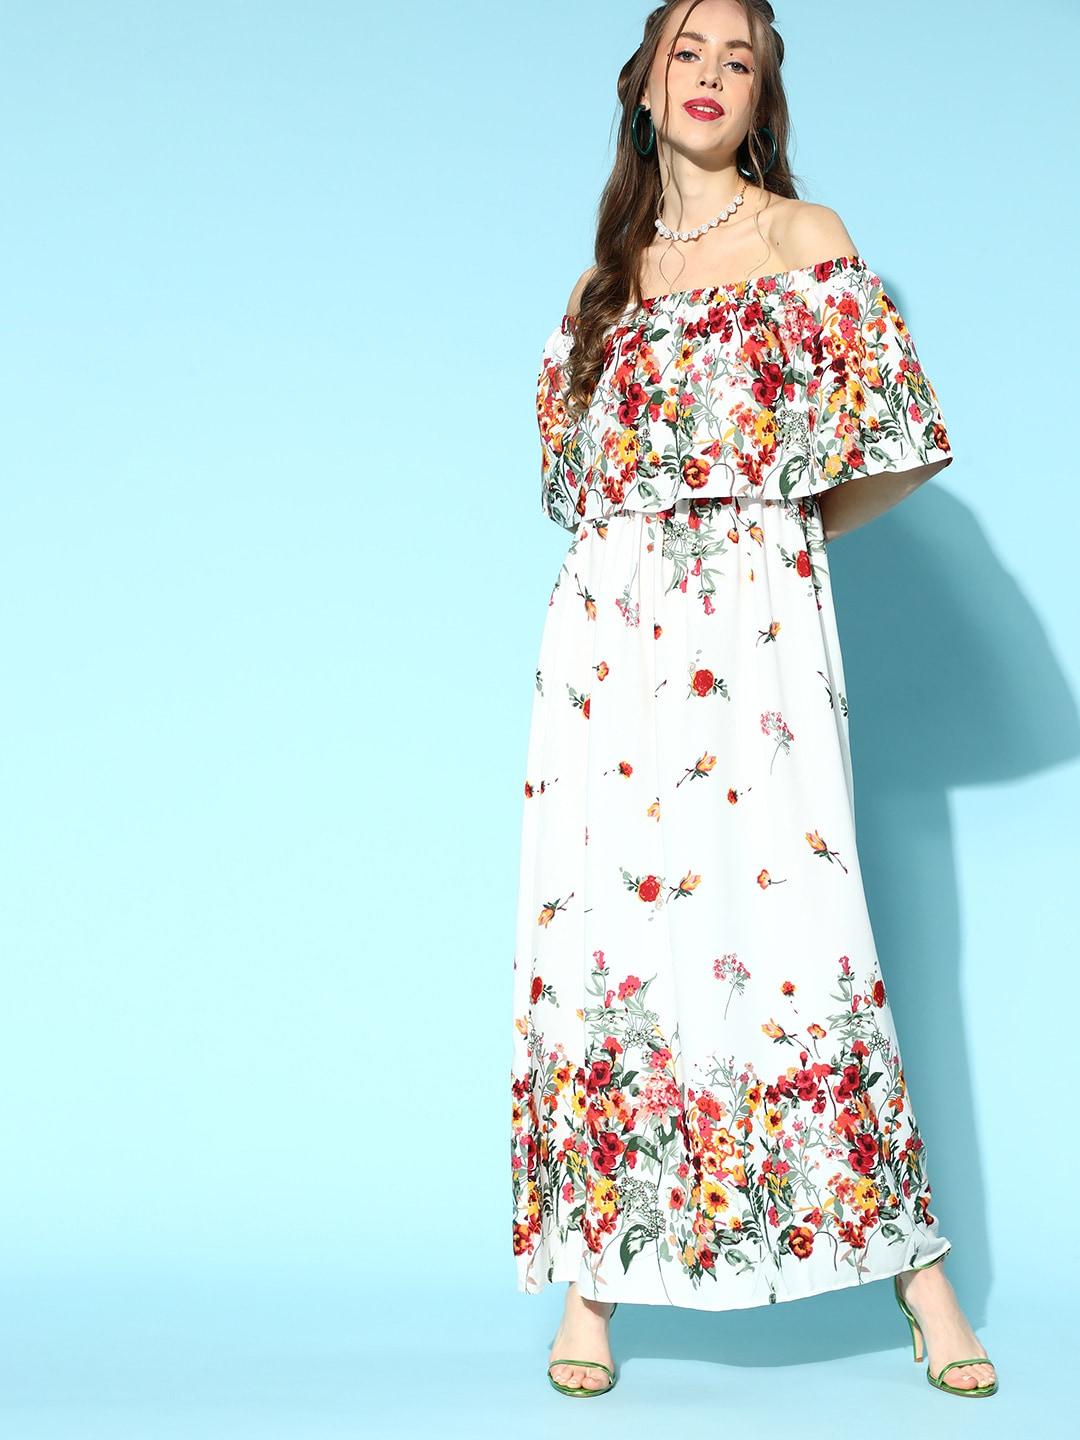 berrylush-white-&-red-floral-print-off-shoulder-layered-crepe-maxi-dress